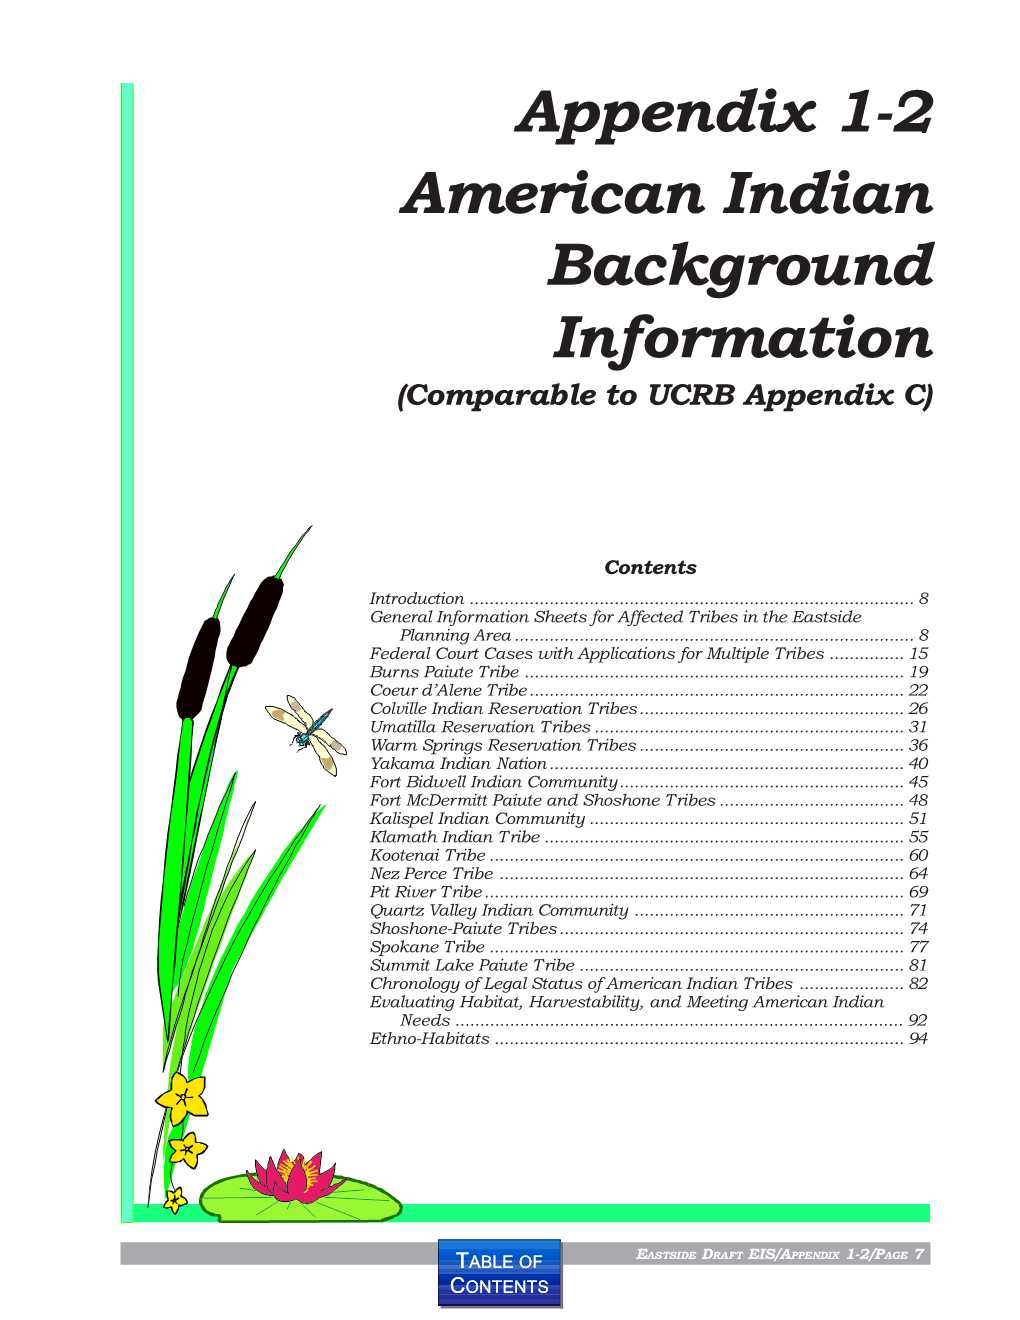 Appendix 1-2 American Indian Background Information (Comparable to UCRB Appendix C)